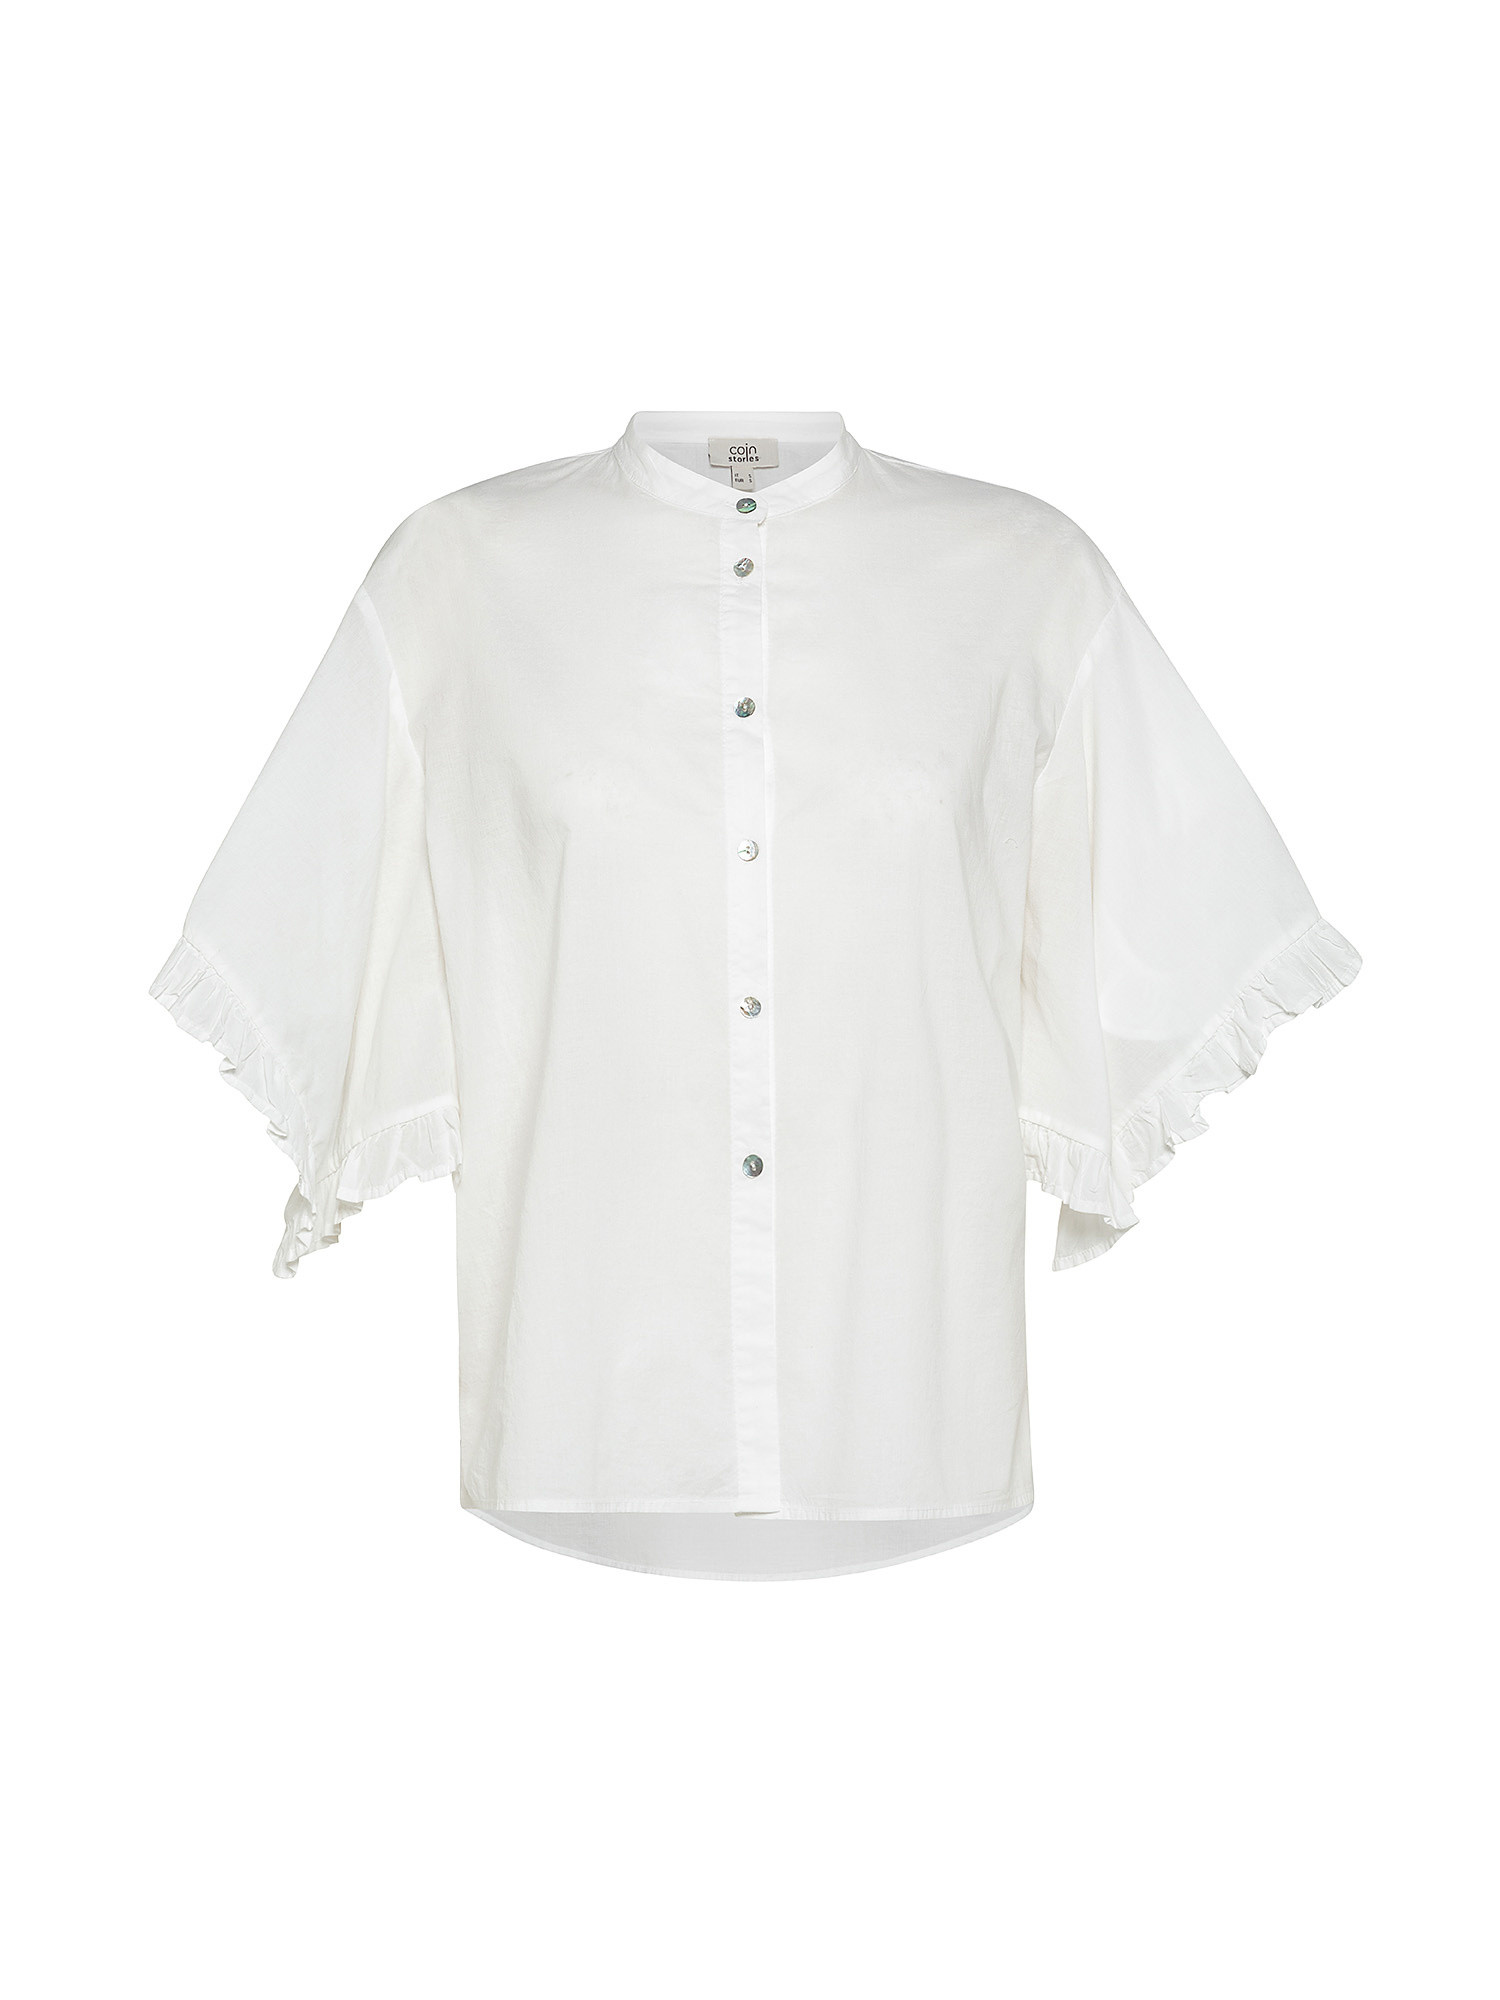 Camicia, Bianco, large image number 0